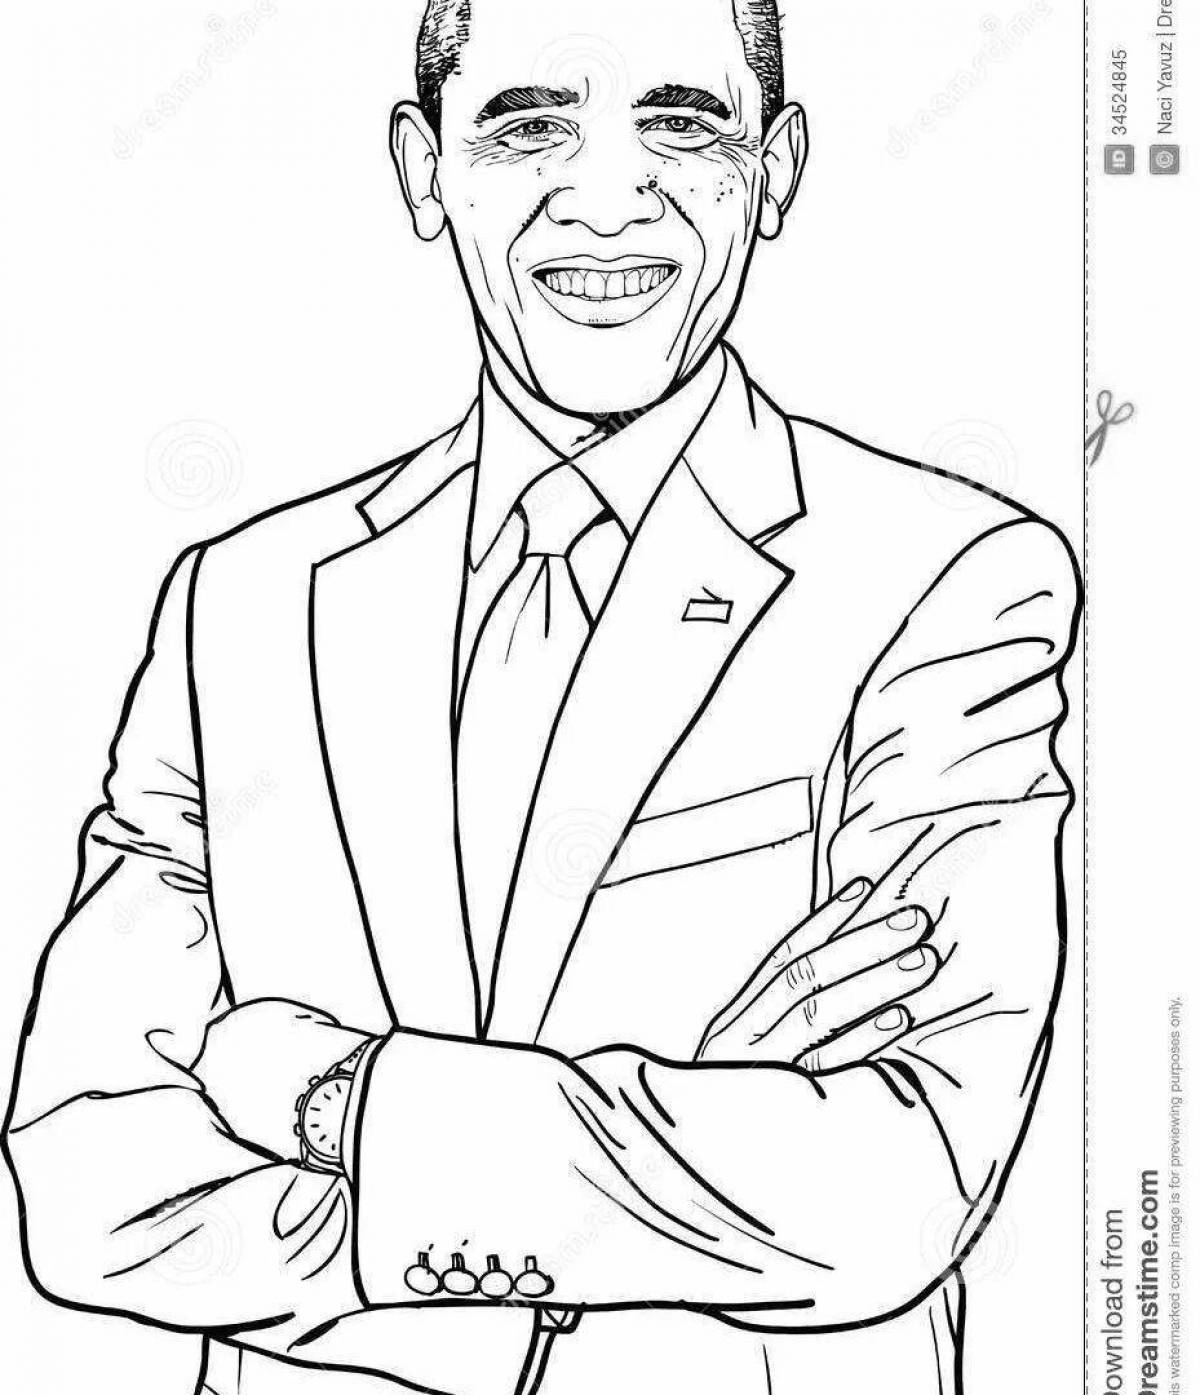 Charming president coloring book